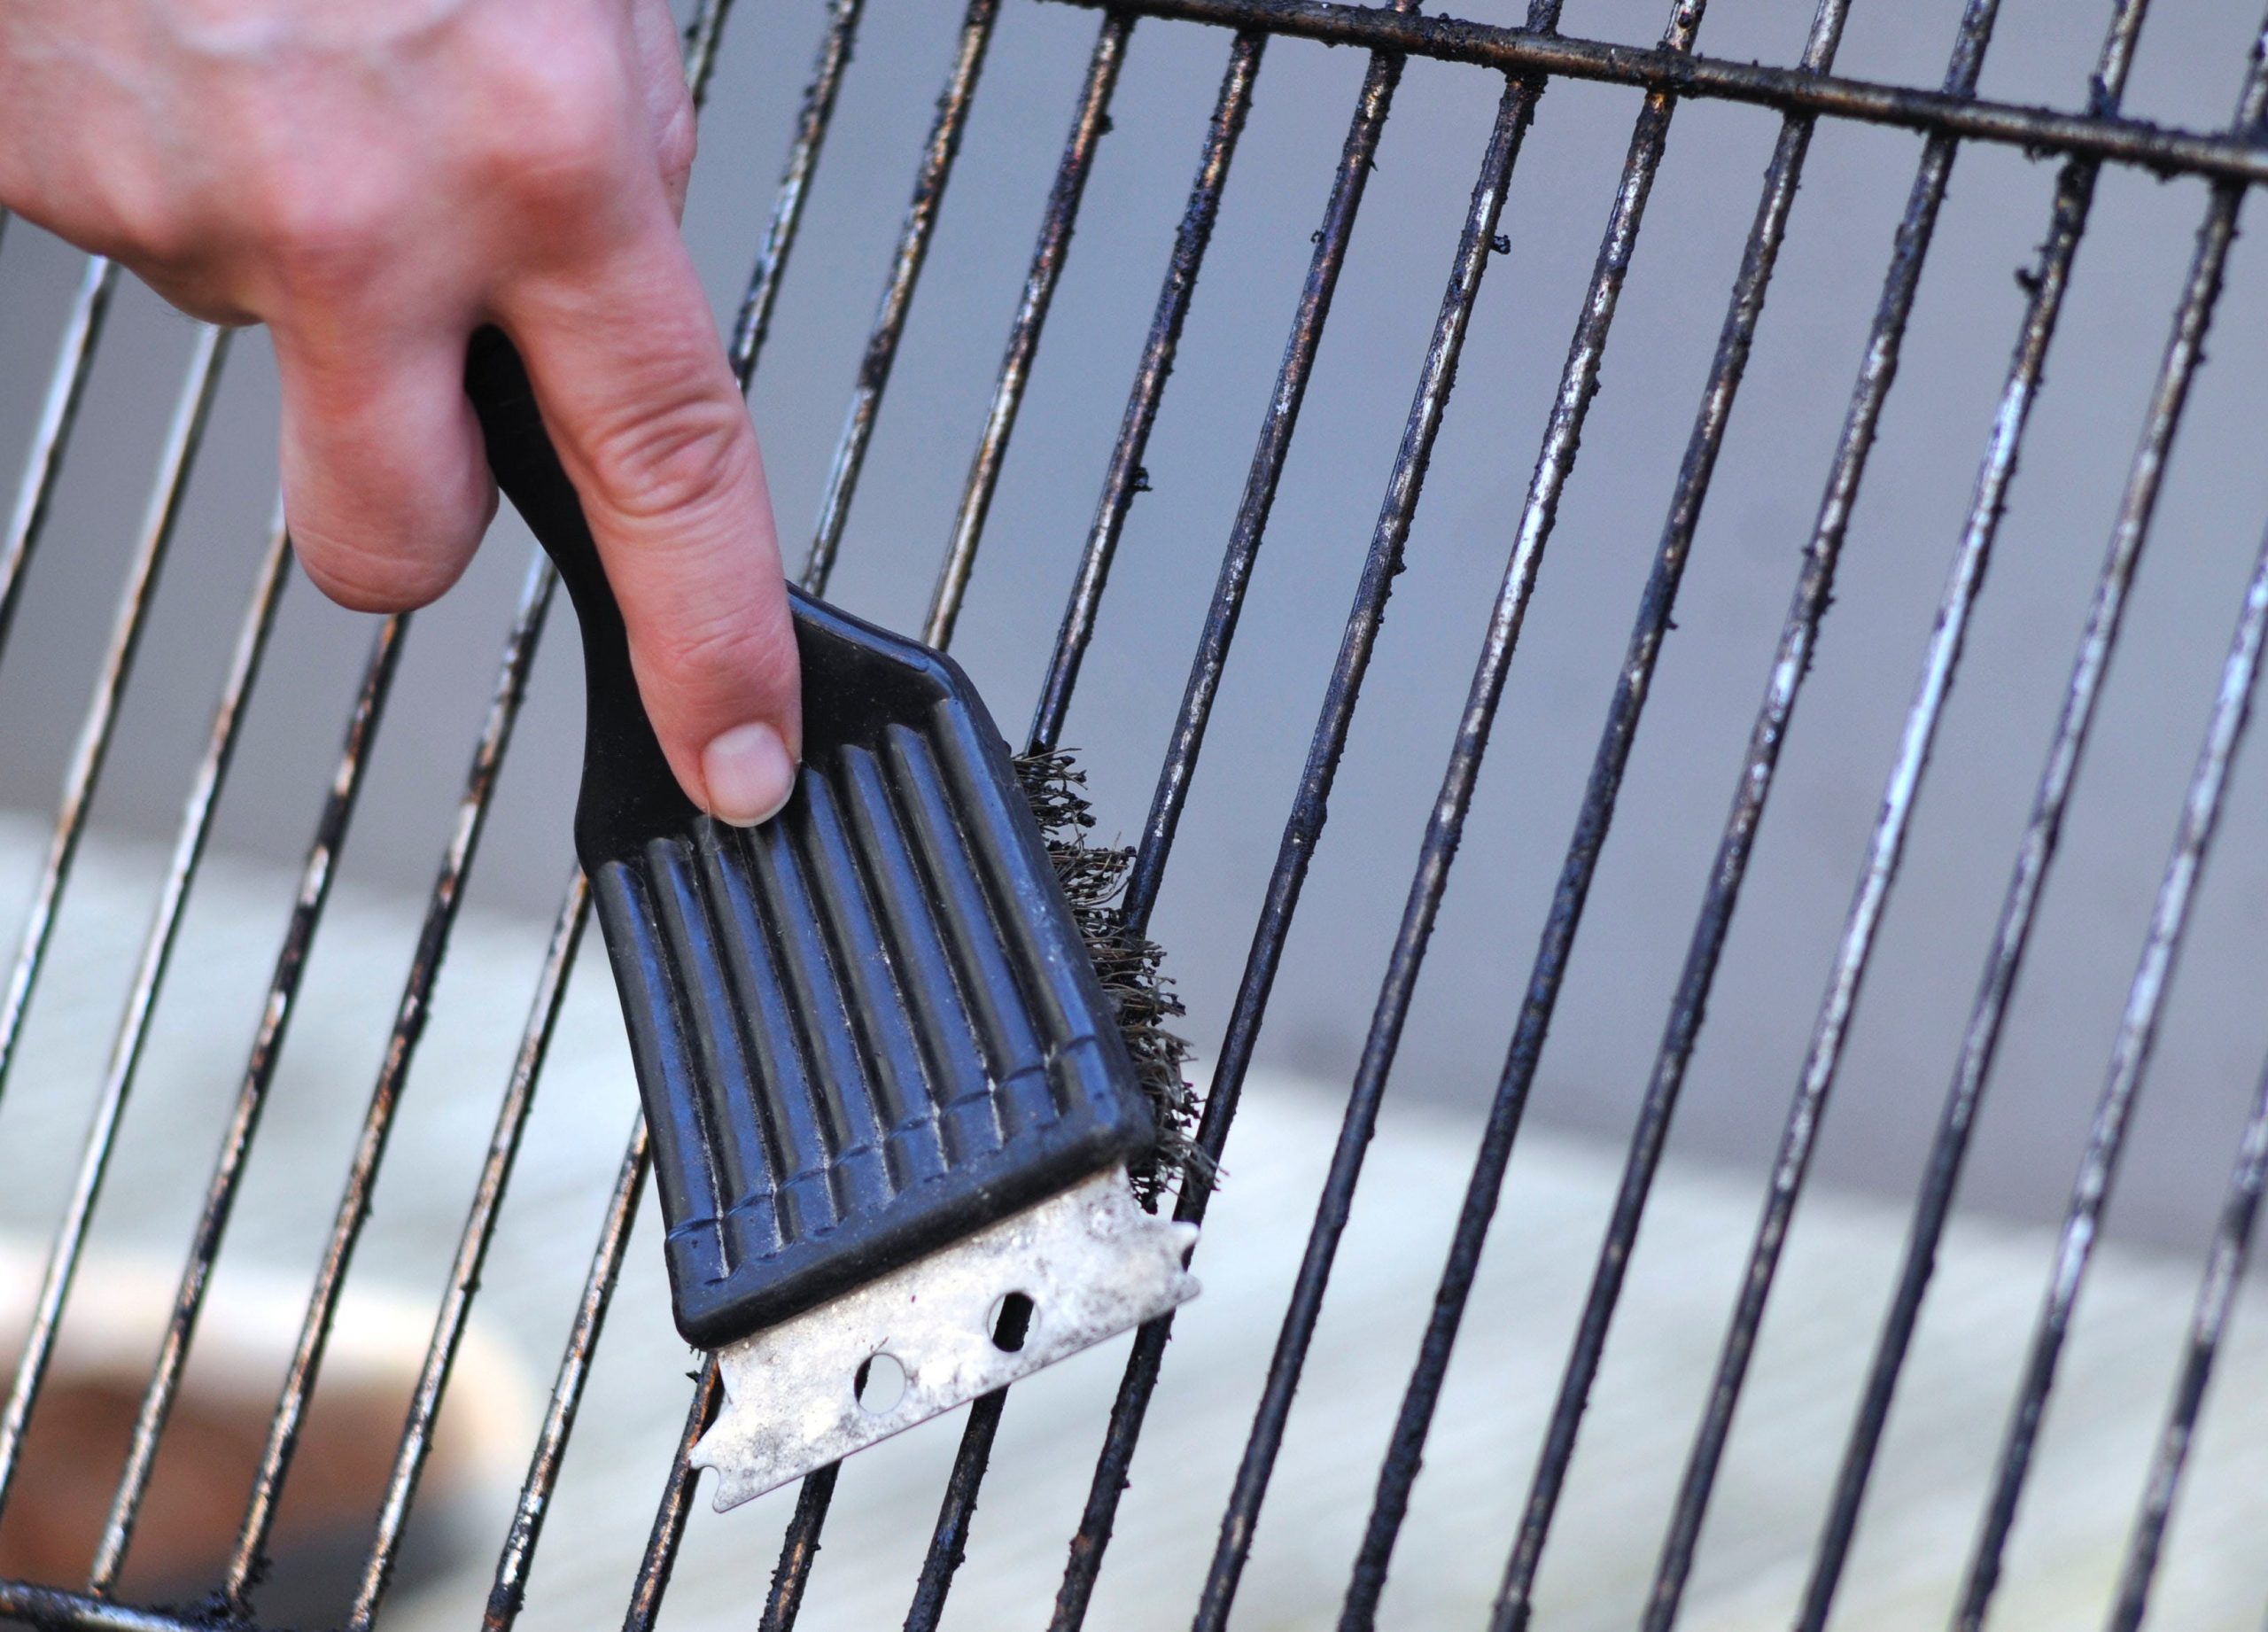 The simple way to clean the grill at home – did you know it?